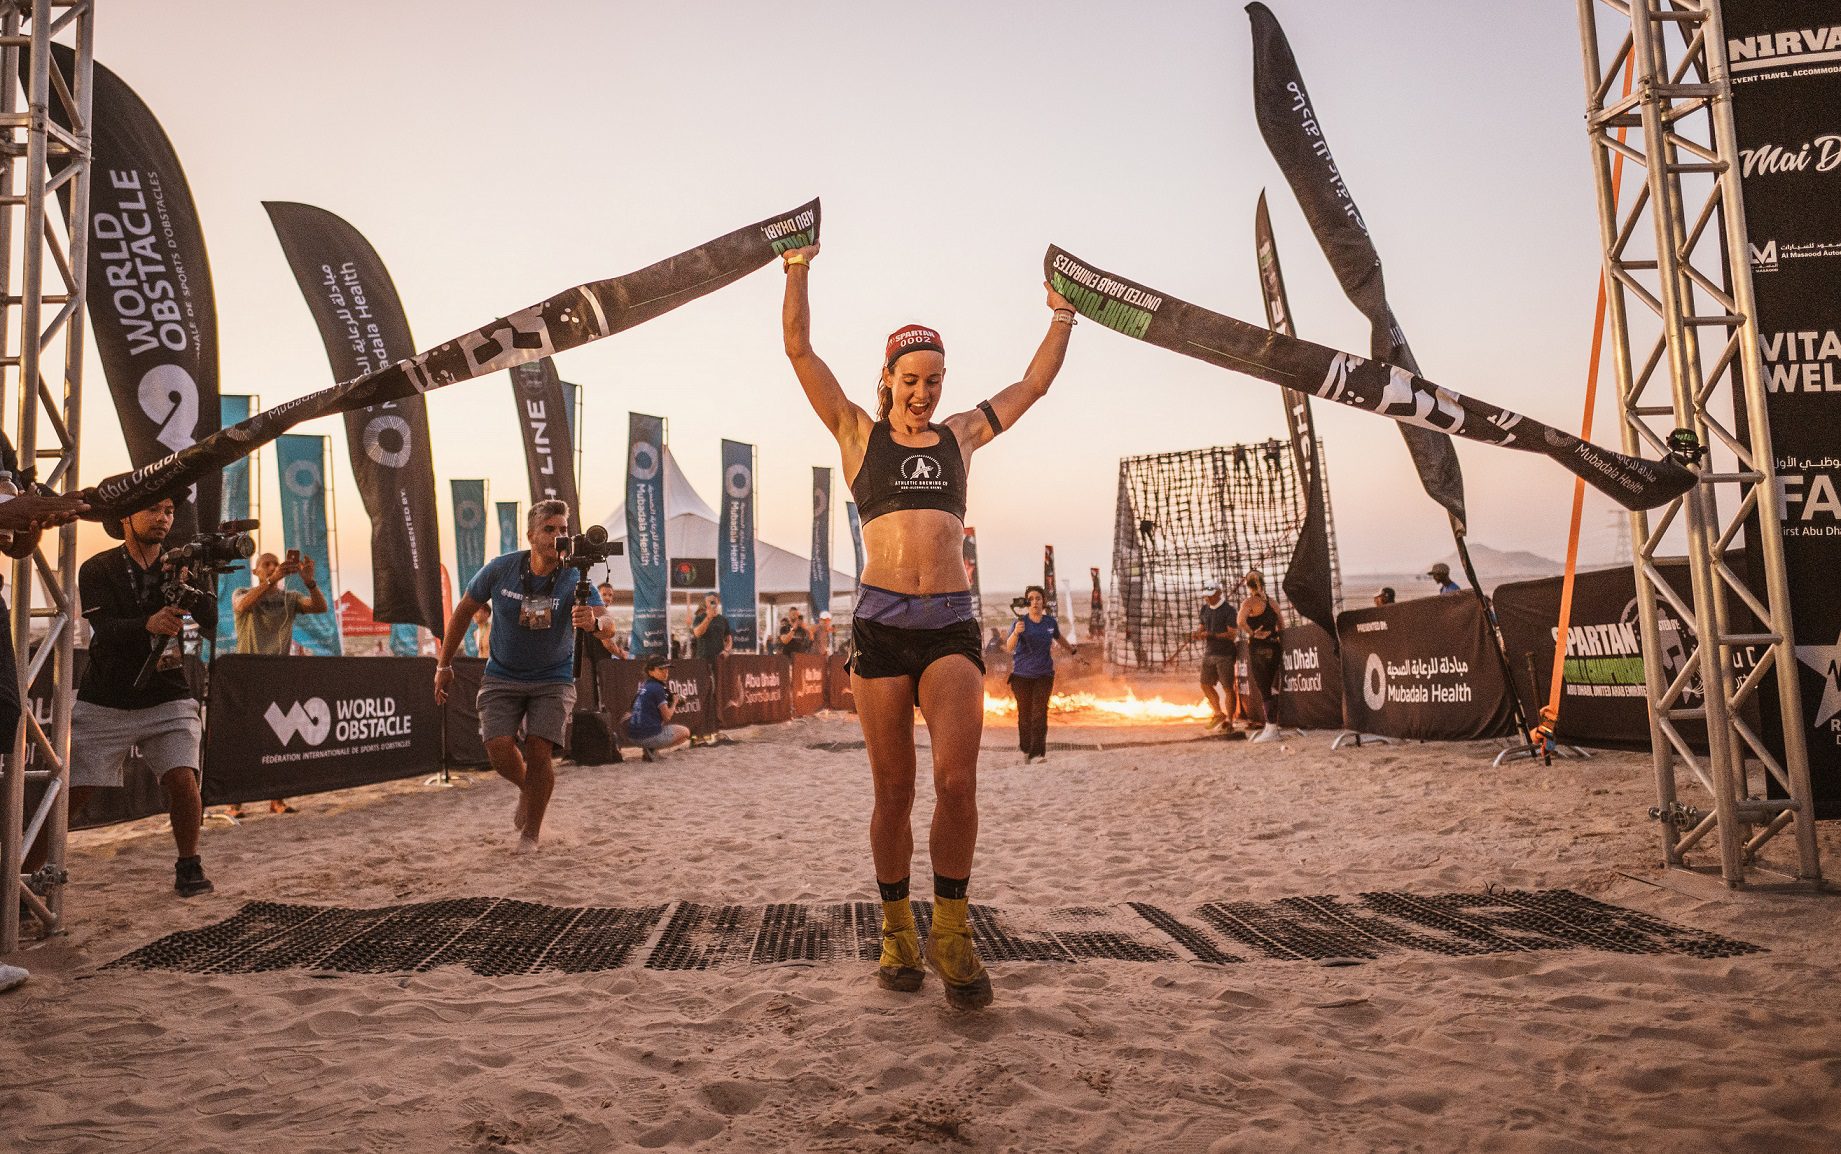 The womens category saw Canadian Lindsay Webster take home the victory with a time of 1 hour 12 mintues and 49 seconds to claim her fourth Spartan World Champs title